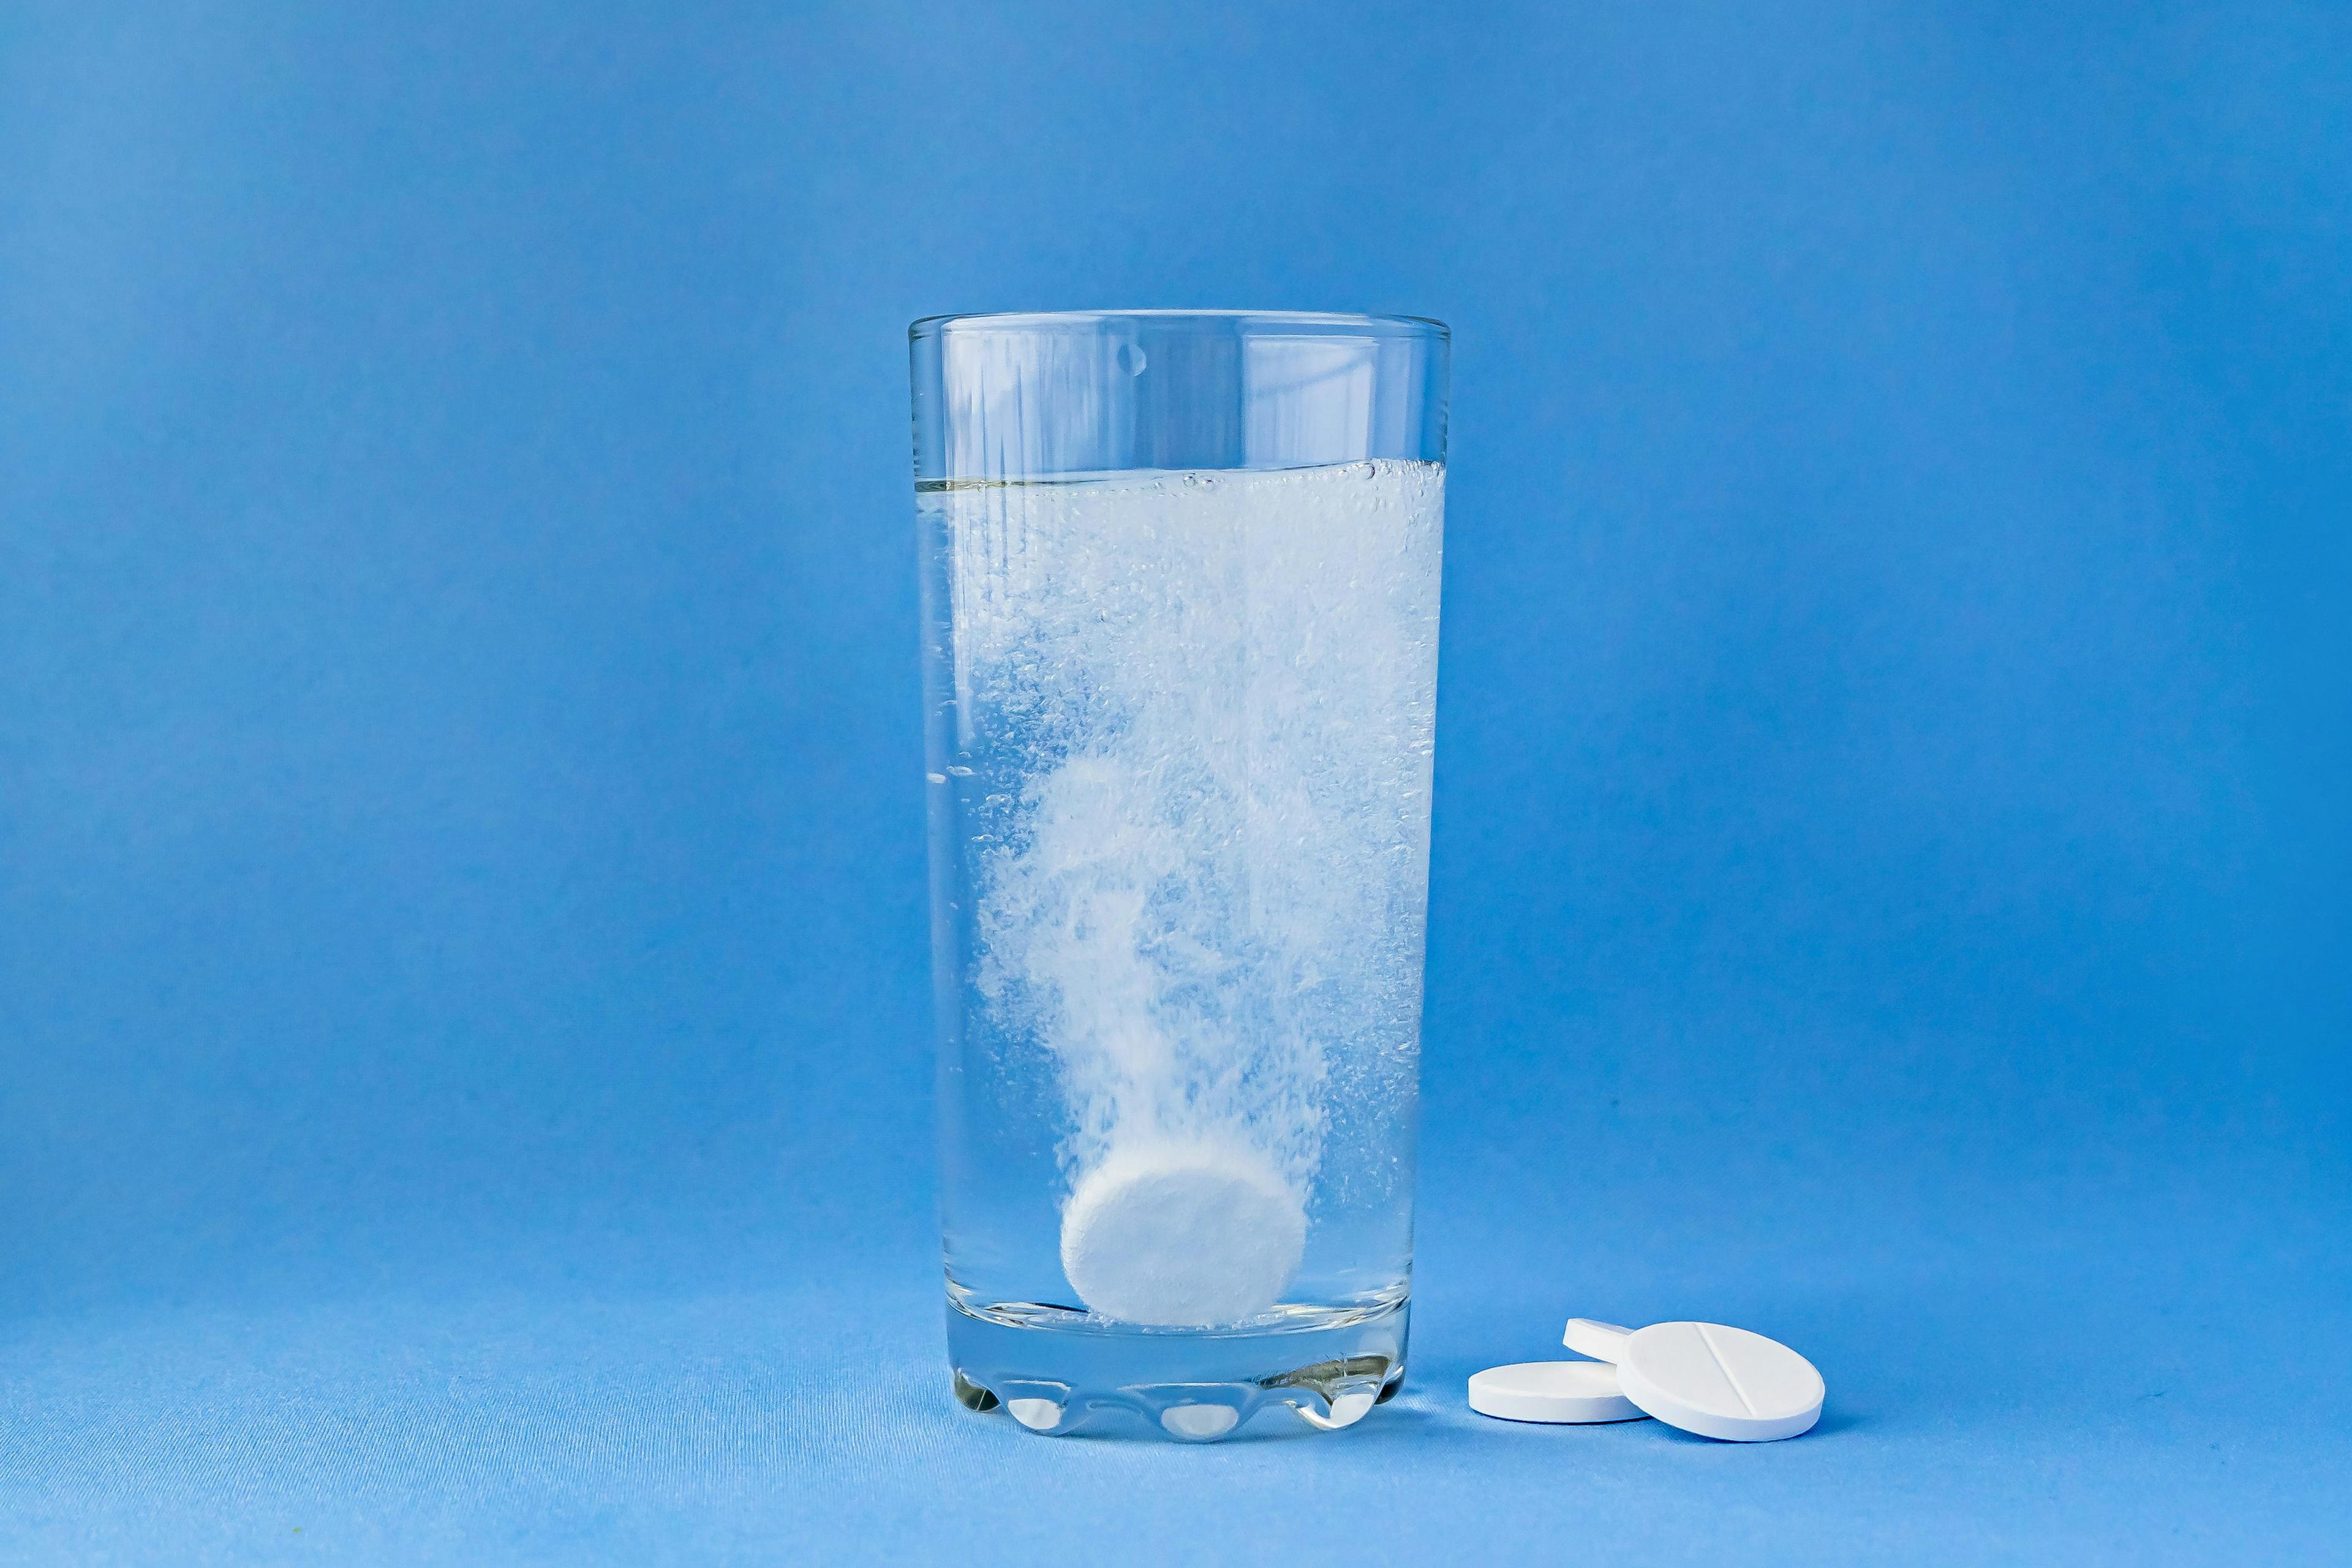 Fizzy aspirin in a glass of water on a blue background. Vertical format and soft focus. | Image Credit: © Natalia - stock.adobe.com